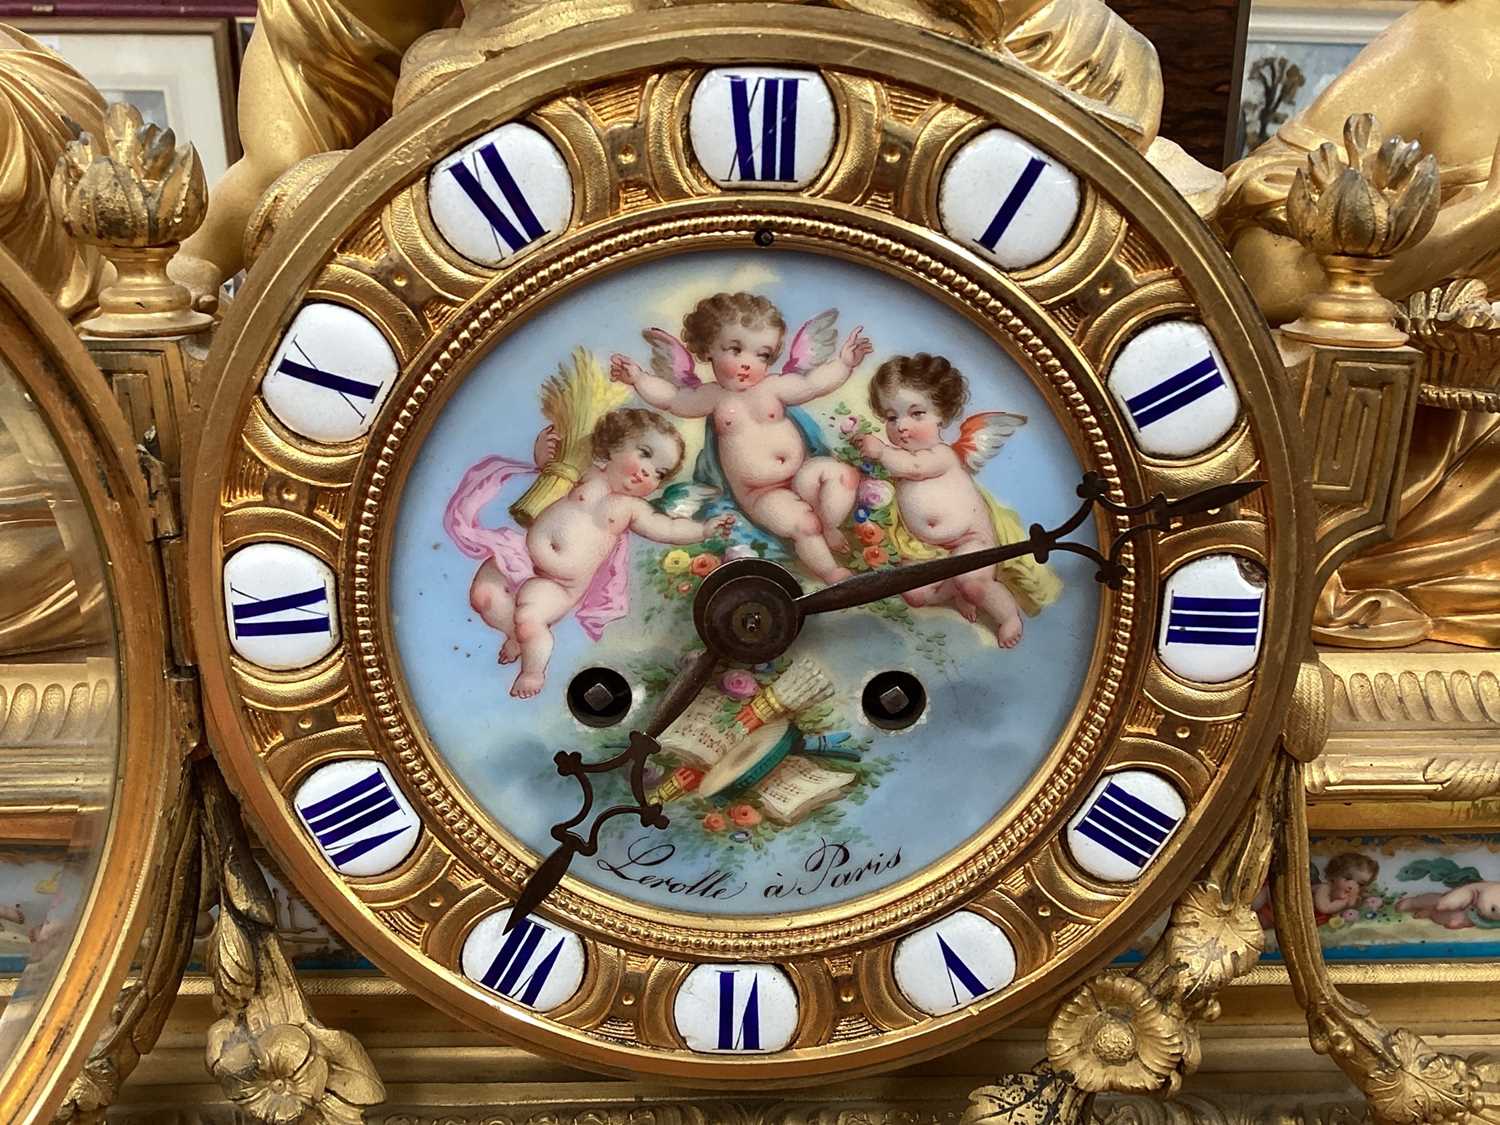 Fine quality large 19th century French ormolu clock garniture by Lerolle à Paris with Sèvres porcela - Image 9 of 26